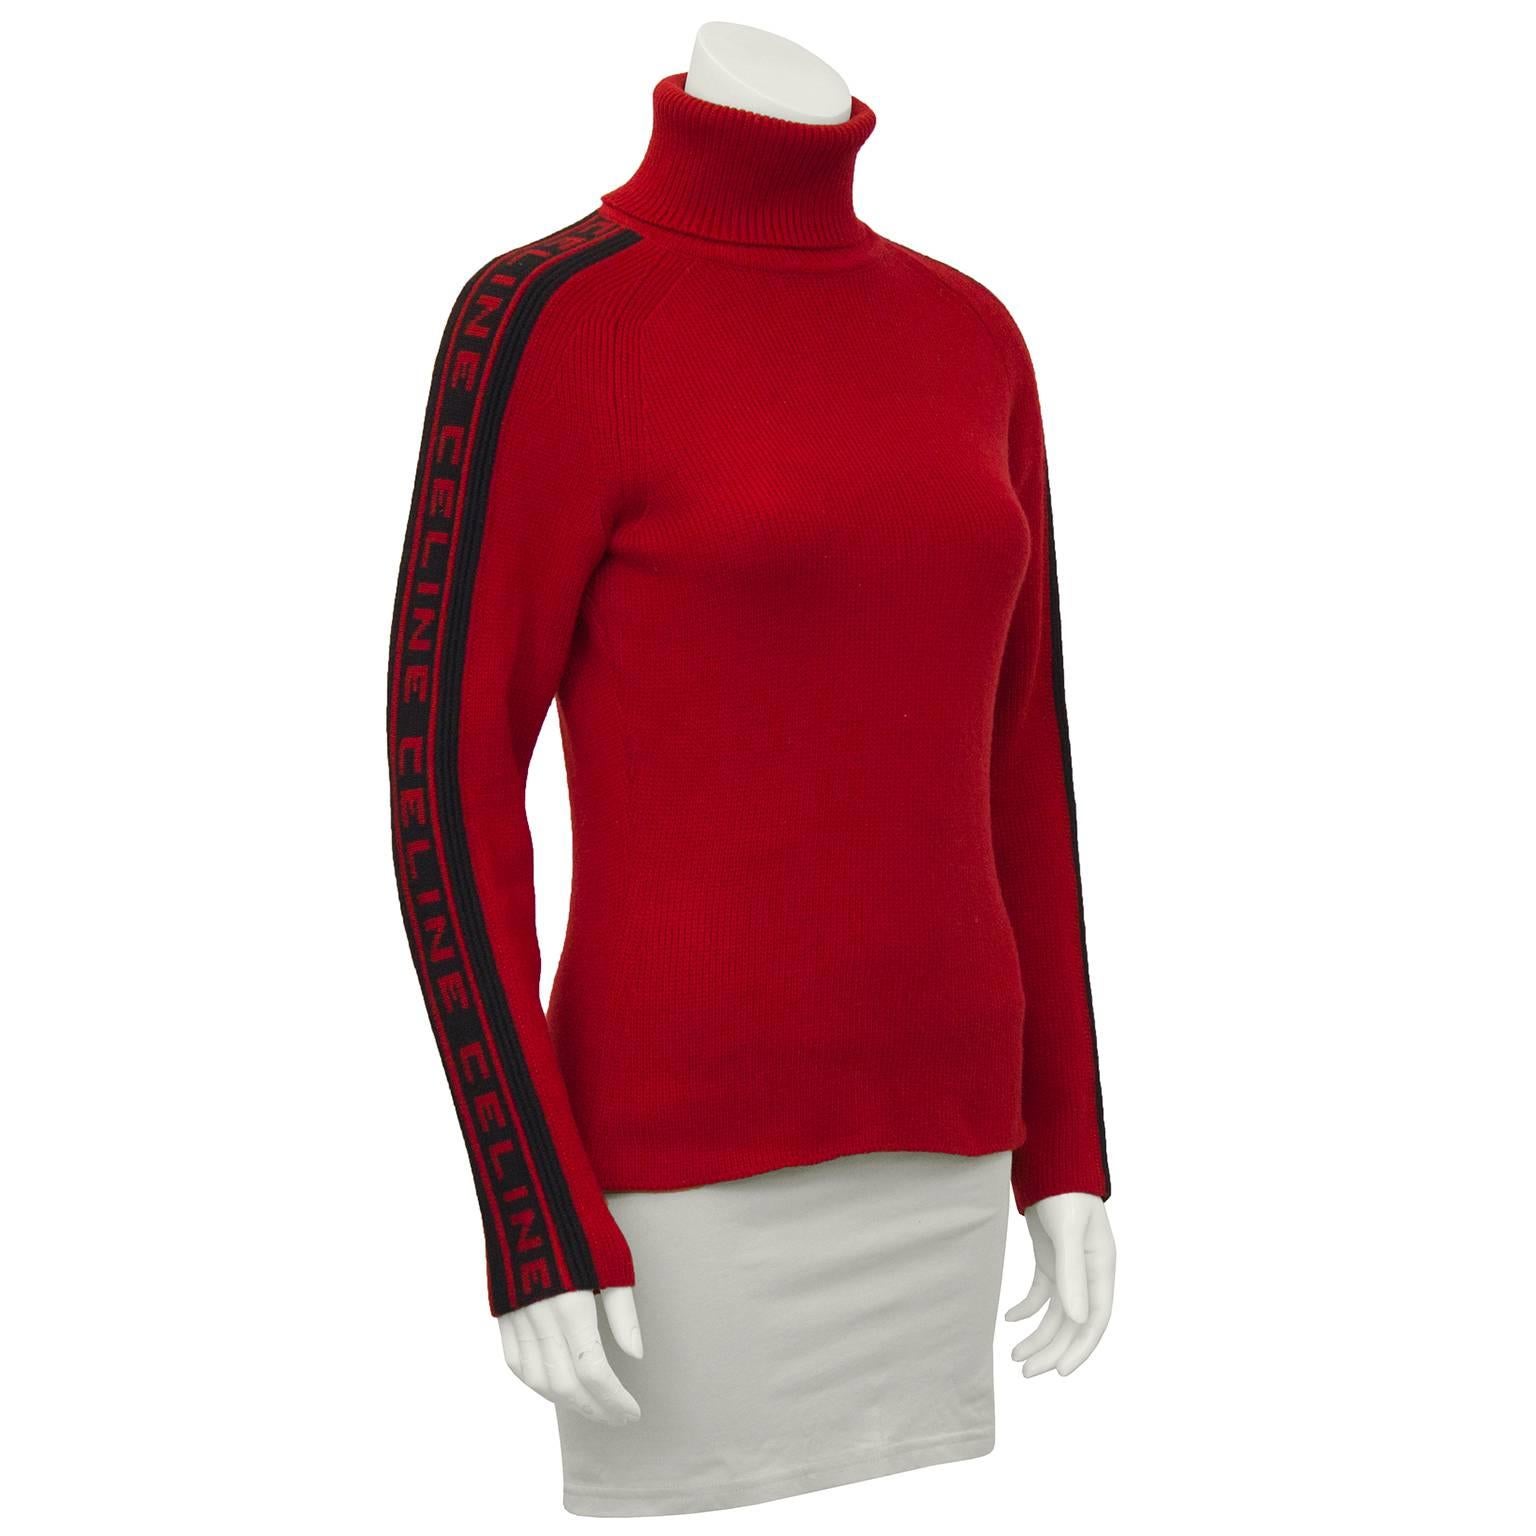 As featured in the F/W 1999 ad campaign worn by Gisele. 100% cashmere red and black ribbed turtleneck with CELINE patterned in black up both narrow ribbed arms. The perfect apres ski look or paired with your favorite jeans, it doesn't get better for